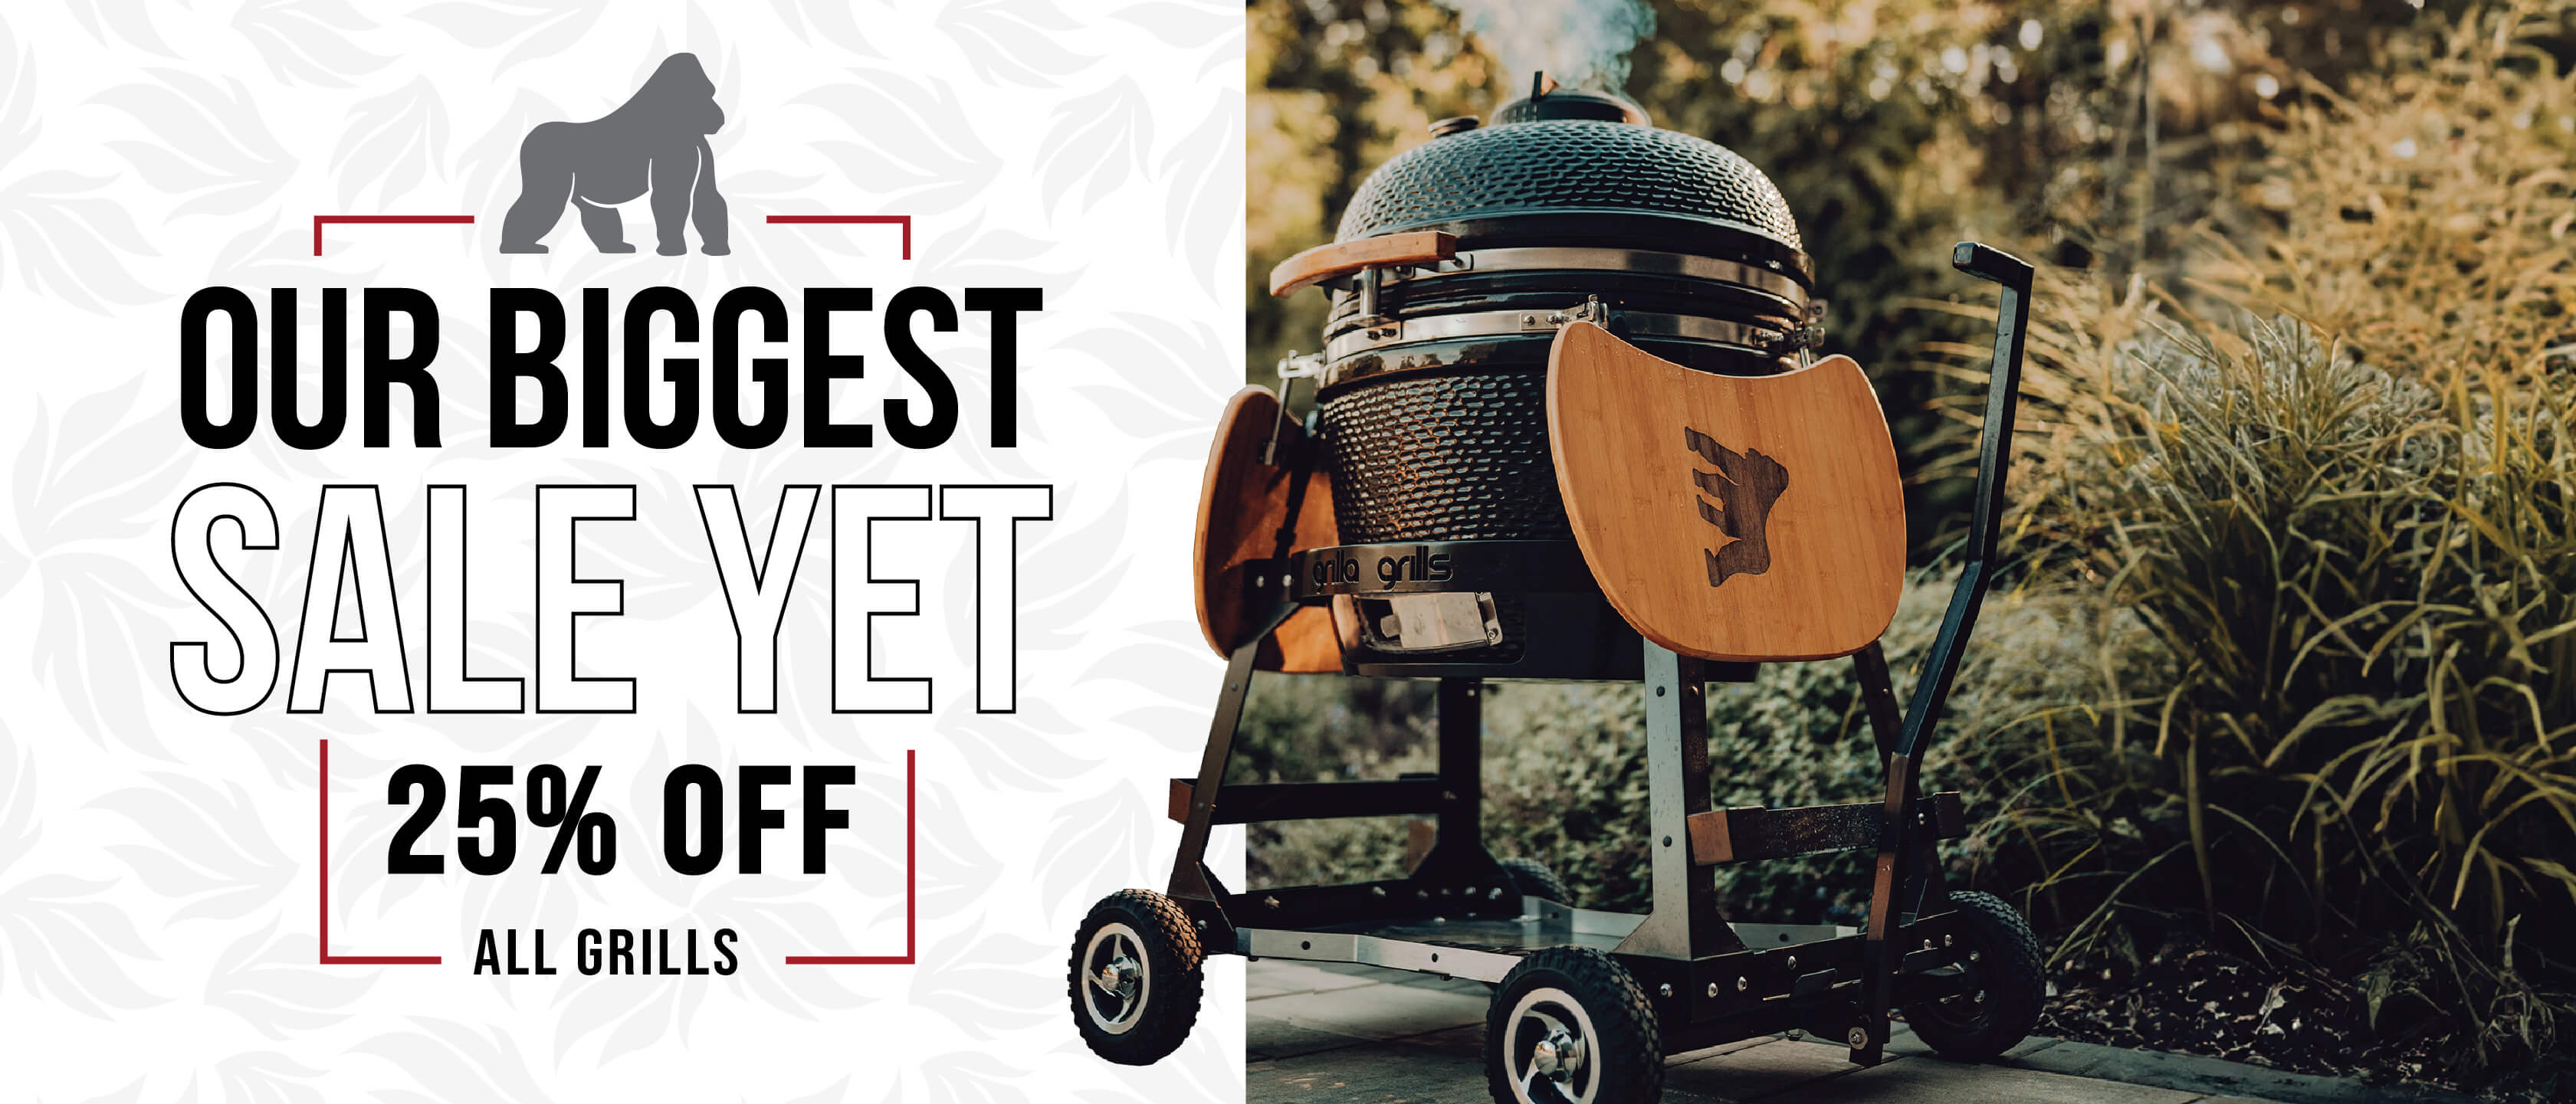 Our Biggest Sale Yet! 25% off all grills 